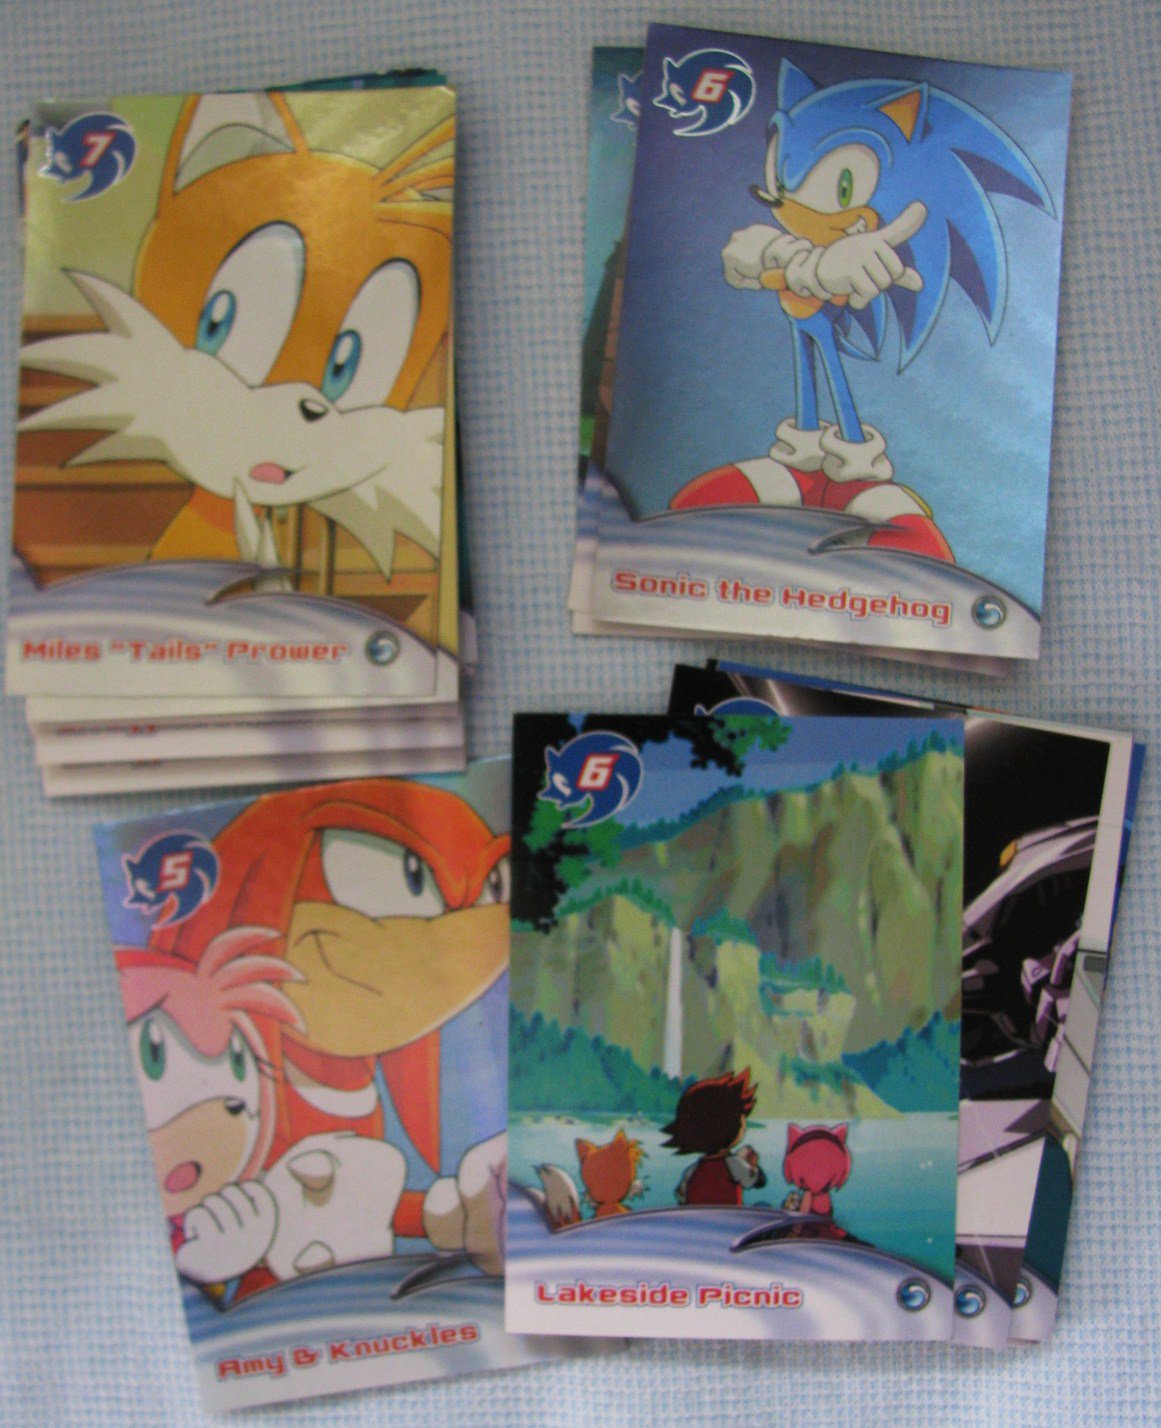 steam trading cards sonic mania